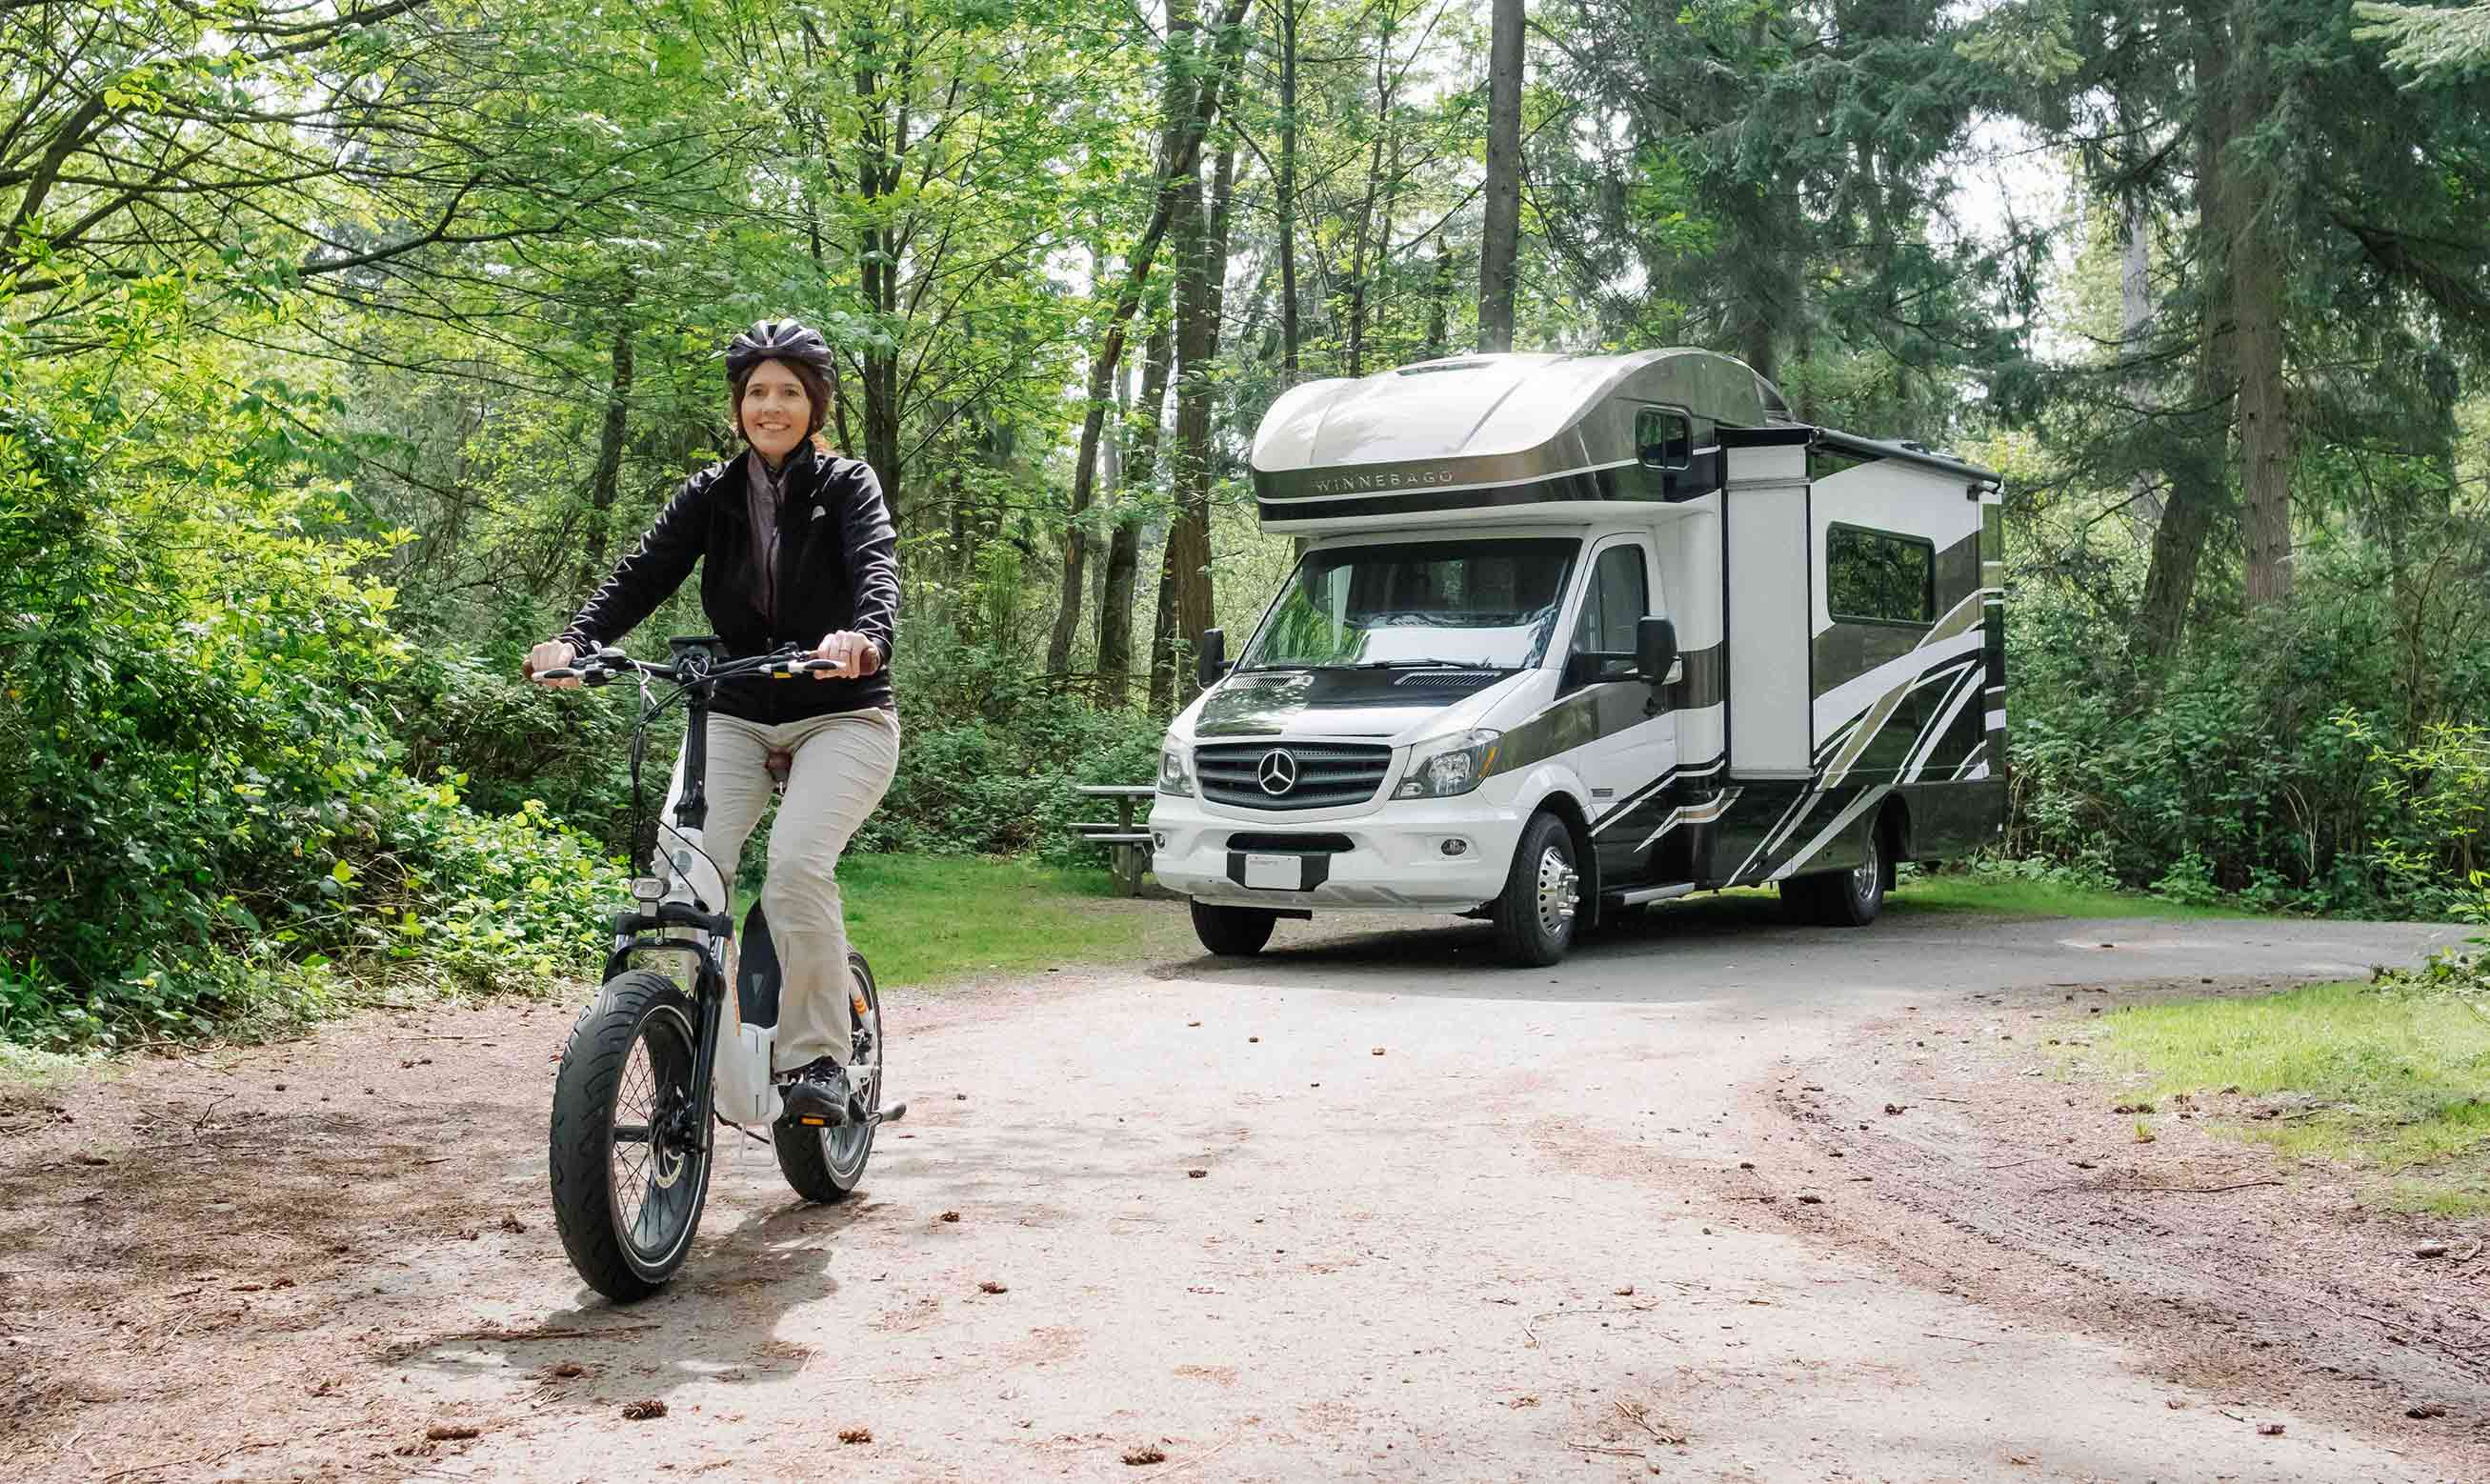 A woman rides away from her RV on a RadMini